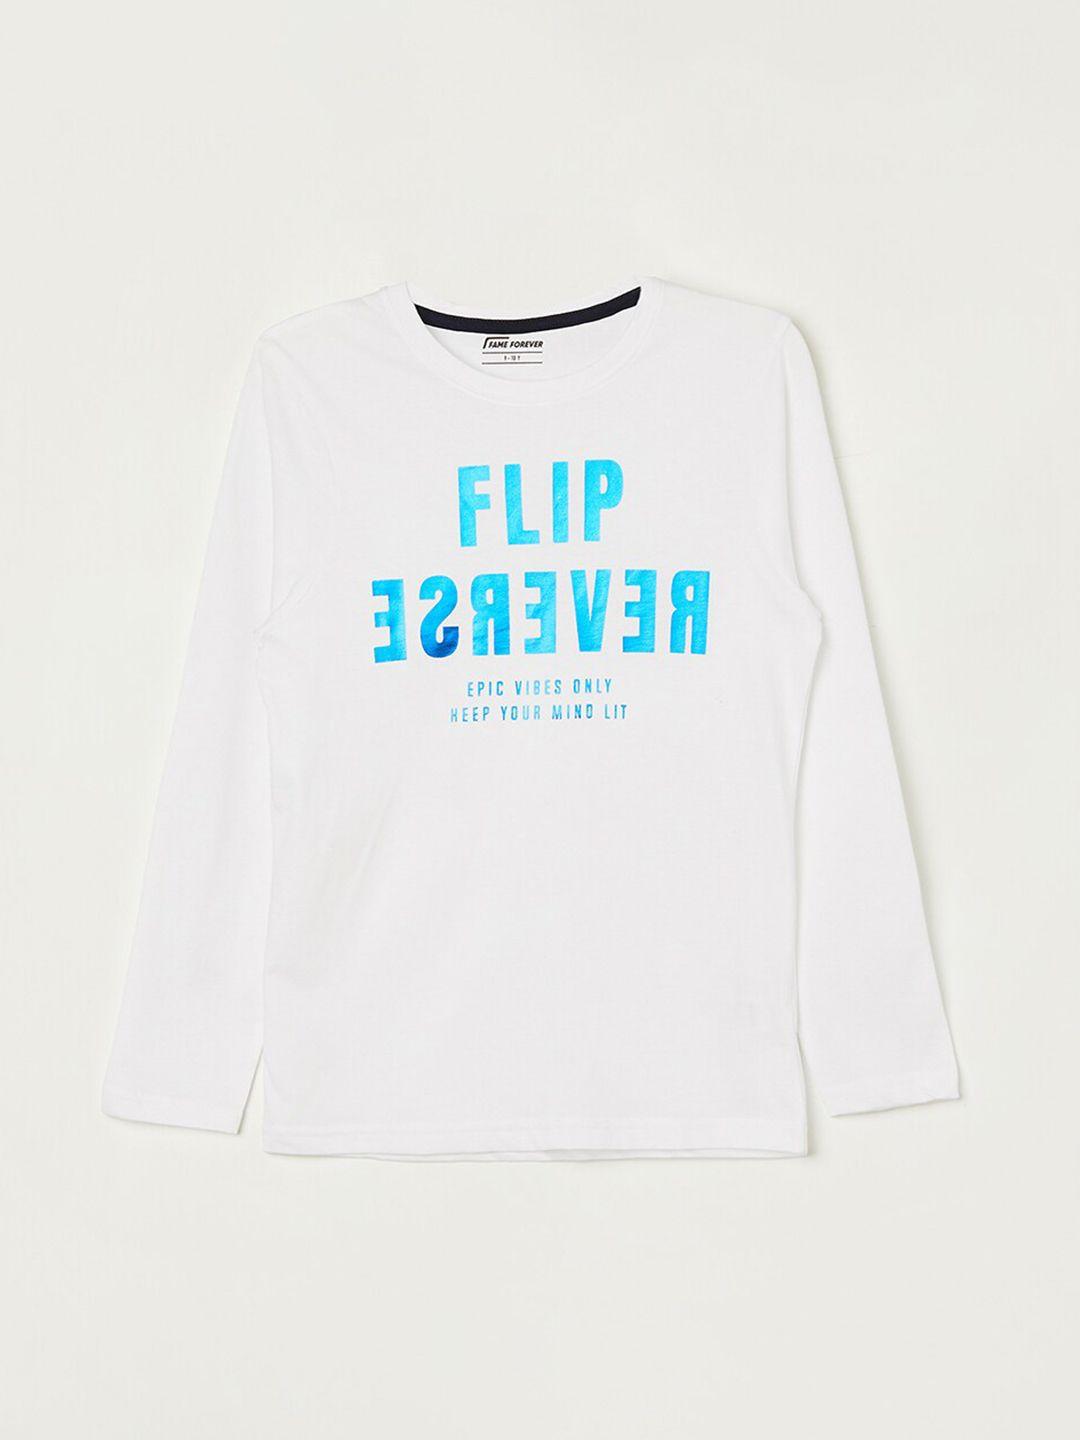 fame-forever-by-lifestyle-boys-white-typography-printed-applique-t-shirt